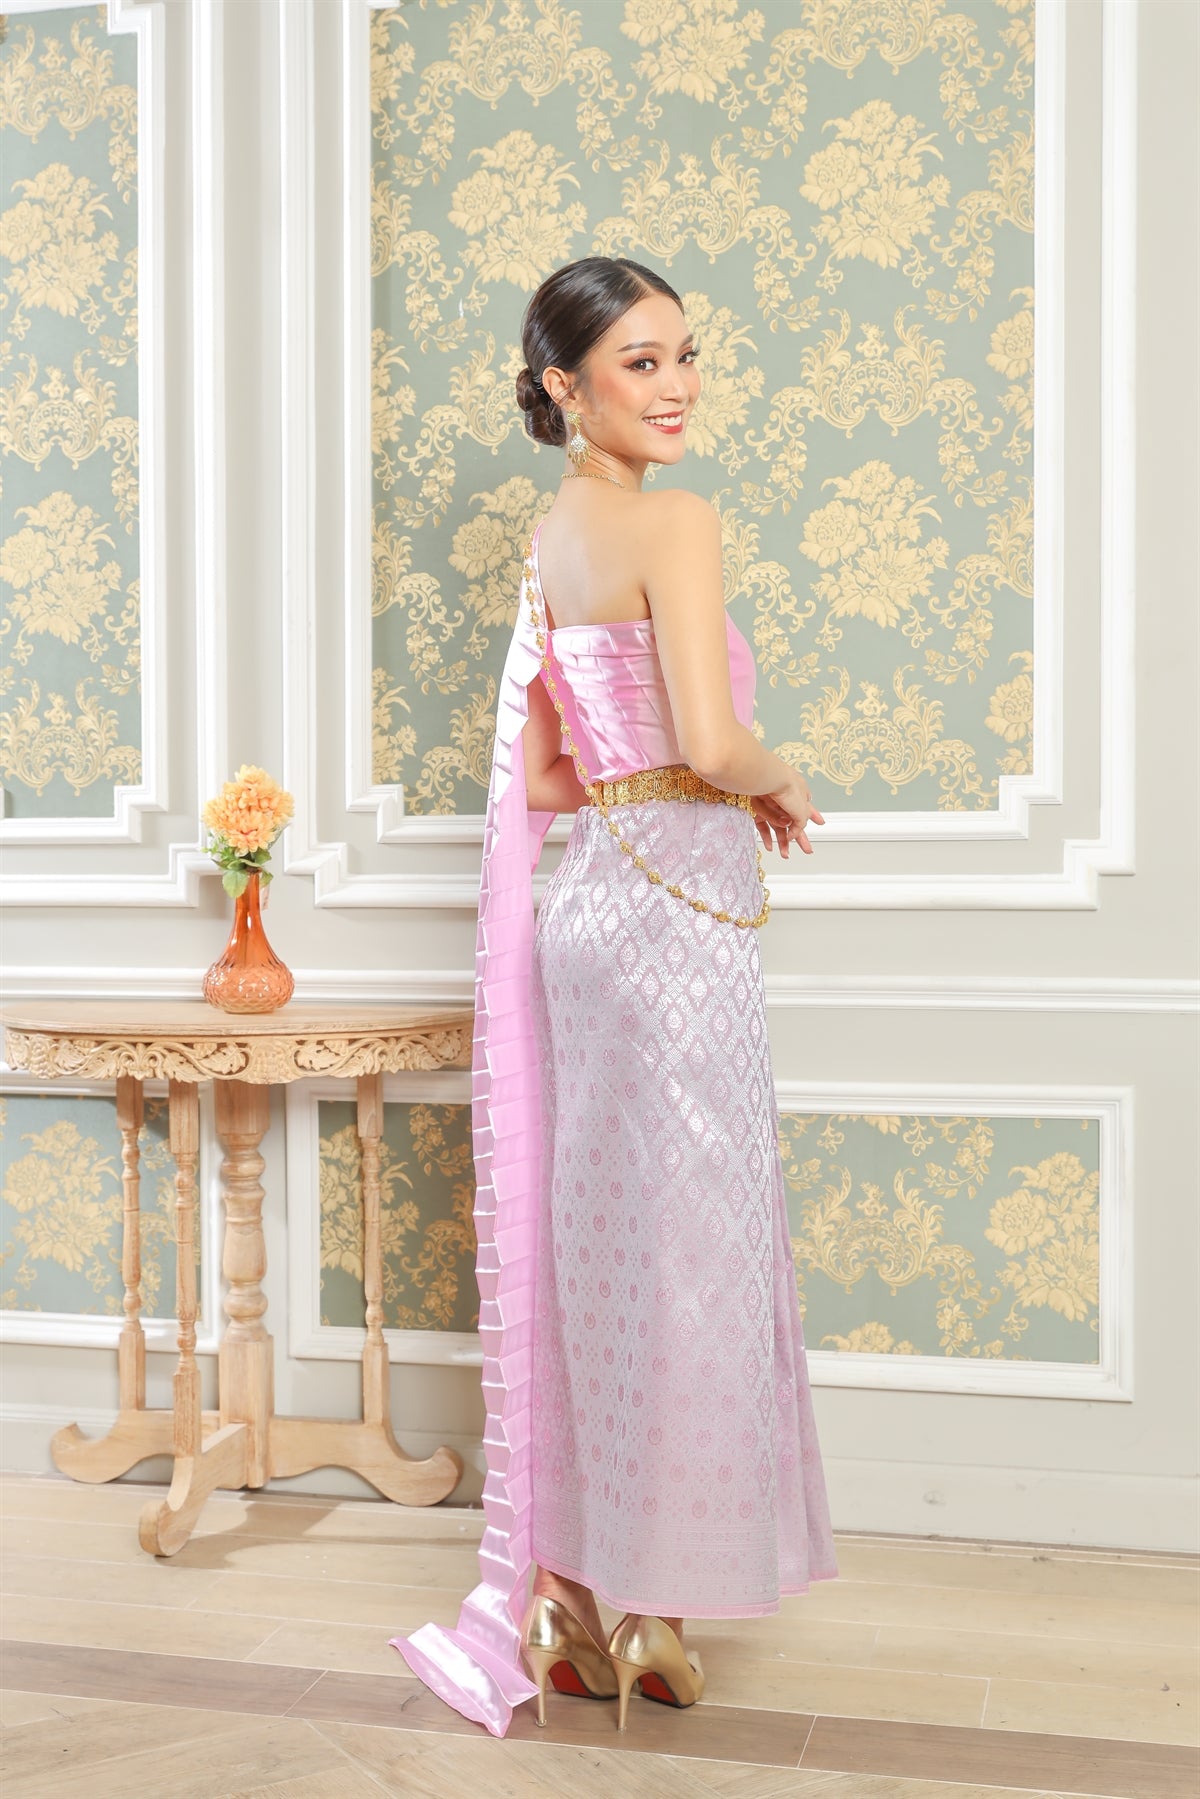 What Thailand's traditional dress looks like.